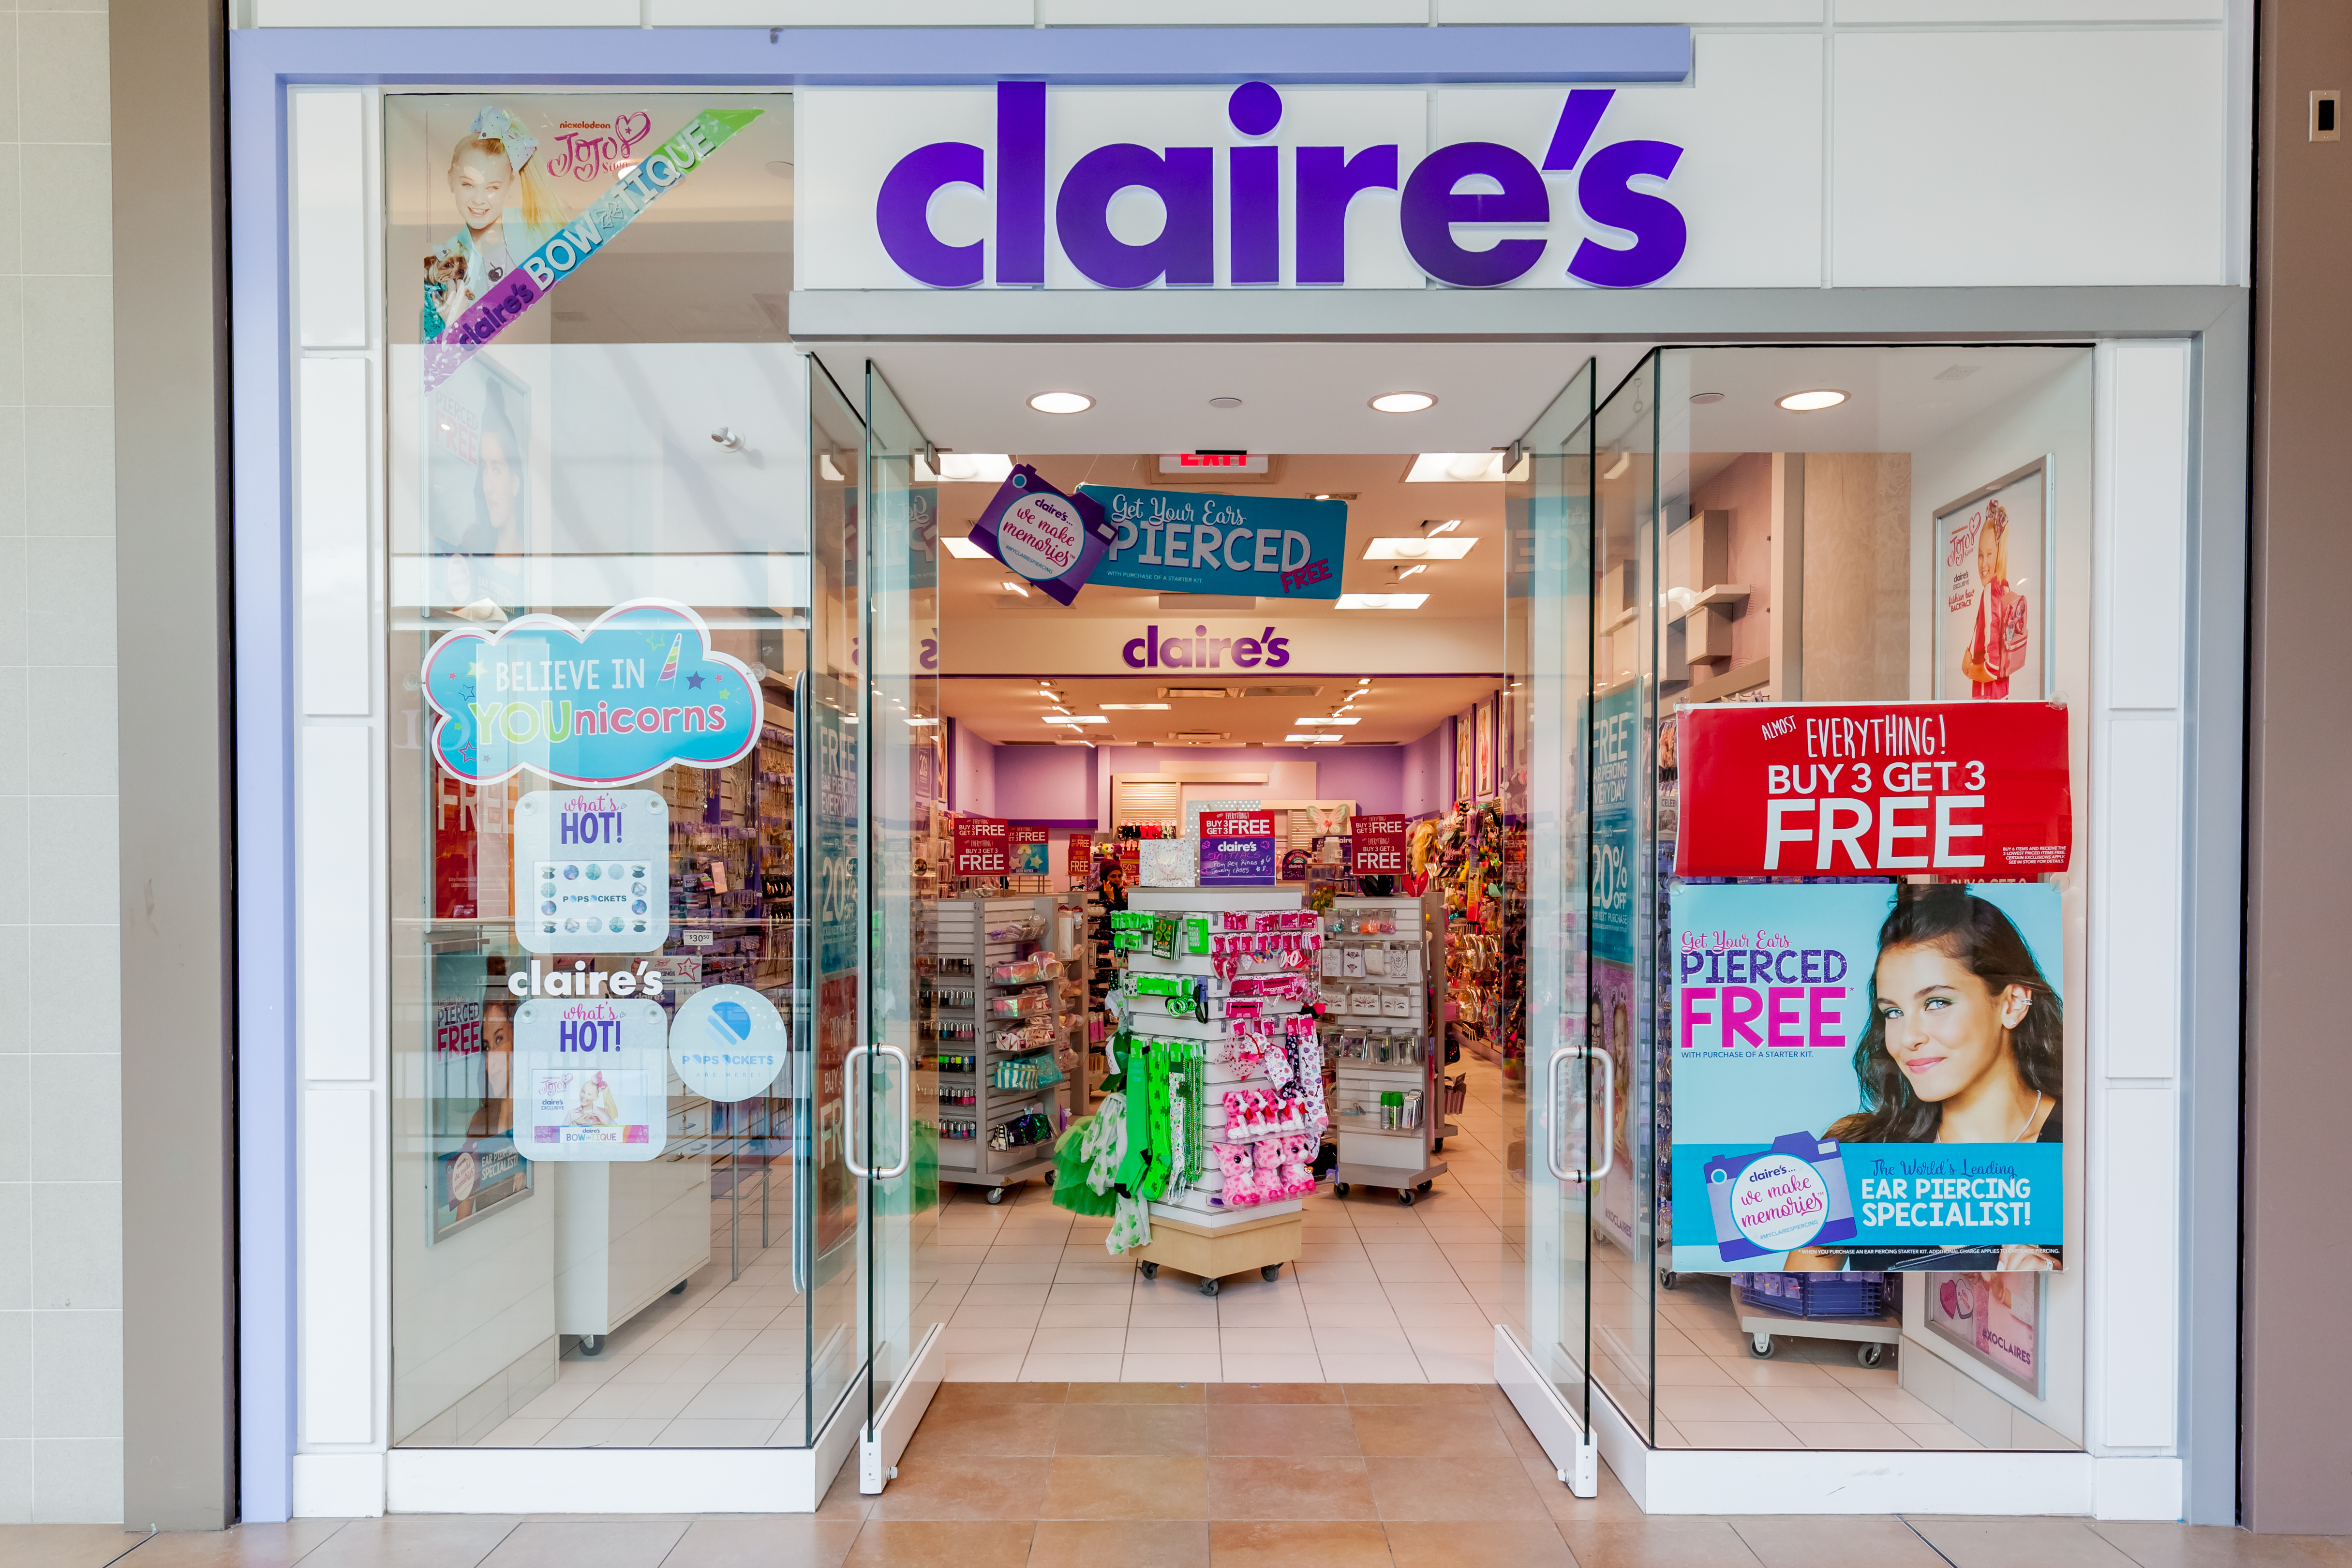 Connect with Claire's Buyers in February: Toy Association to Host